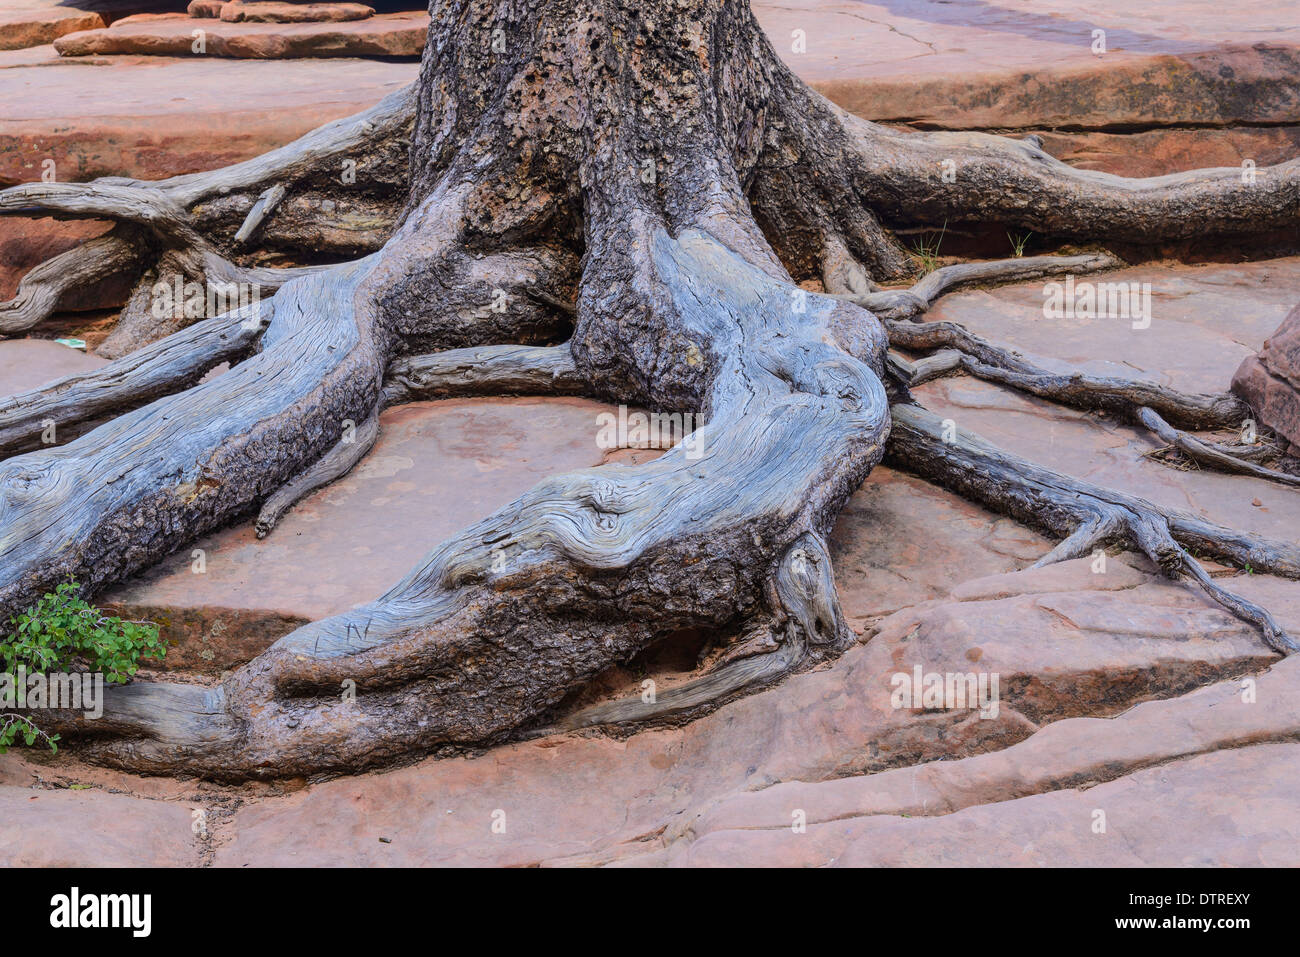 Ponderosa Pine Tree Roots clinging to the slickrock, near Scouts Lookout, Zion National Park, Utah, USA Stock Photo